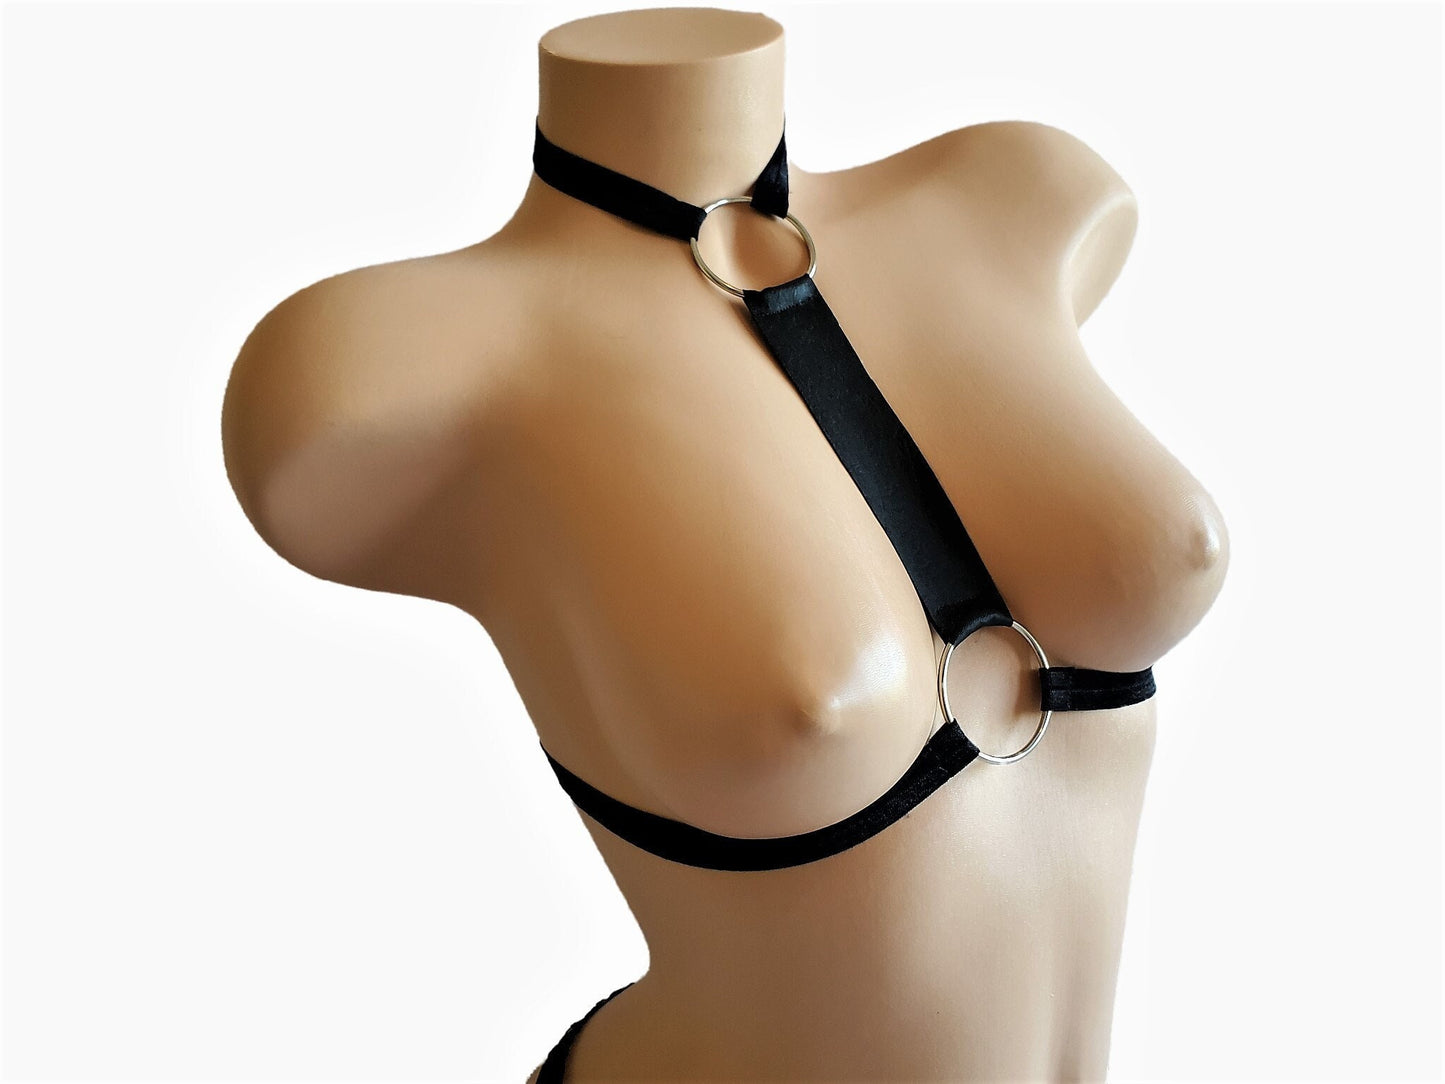 O Ring Chest Harness, BDSM Harness Lingerie, Faux Leather Bra, Leather Bondage Lingerie, Cupless Bra, Open Chest Harness, O Ring Lingerie